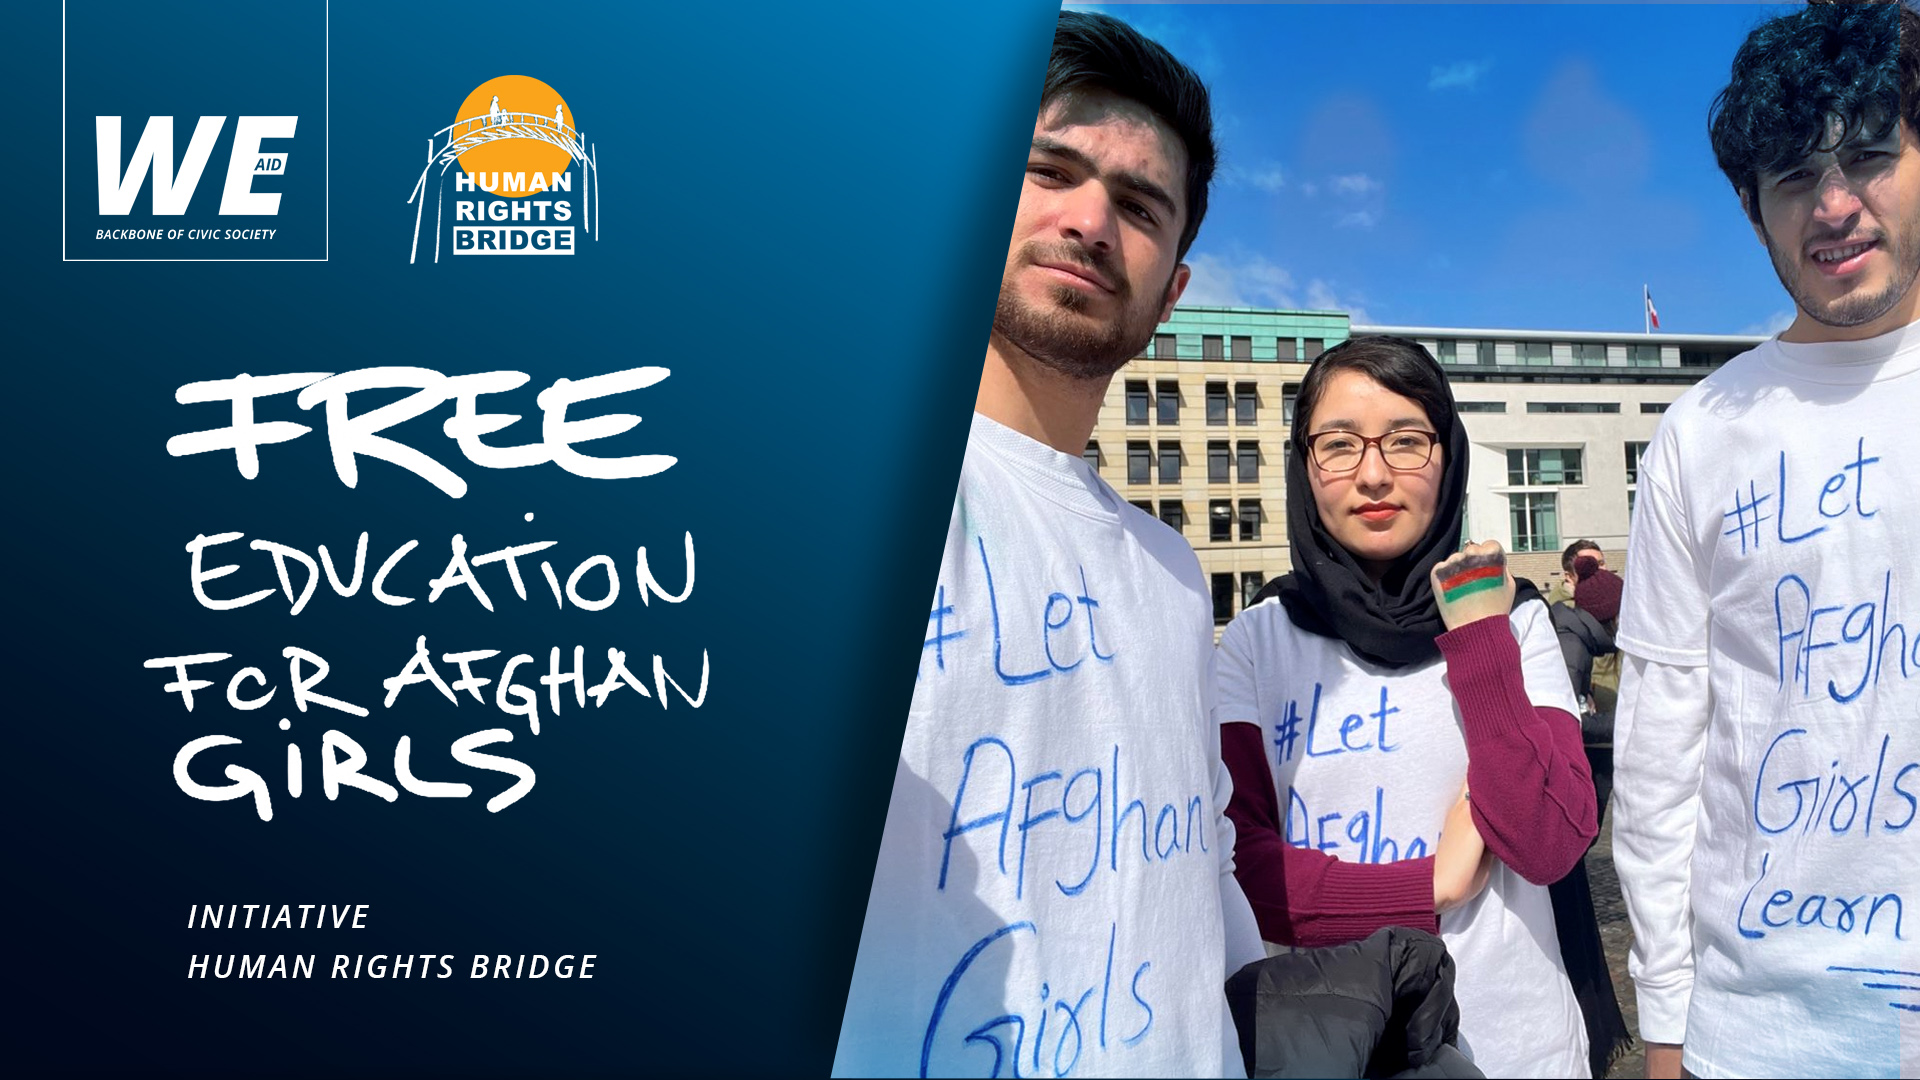 Watch a short video on HUMAN RIGHTS BRIDGE - education is a humanright